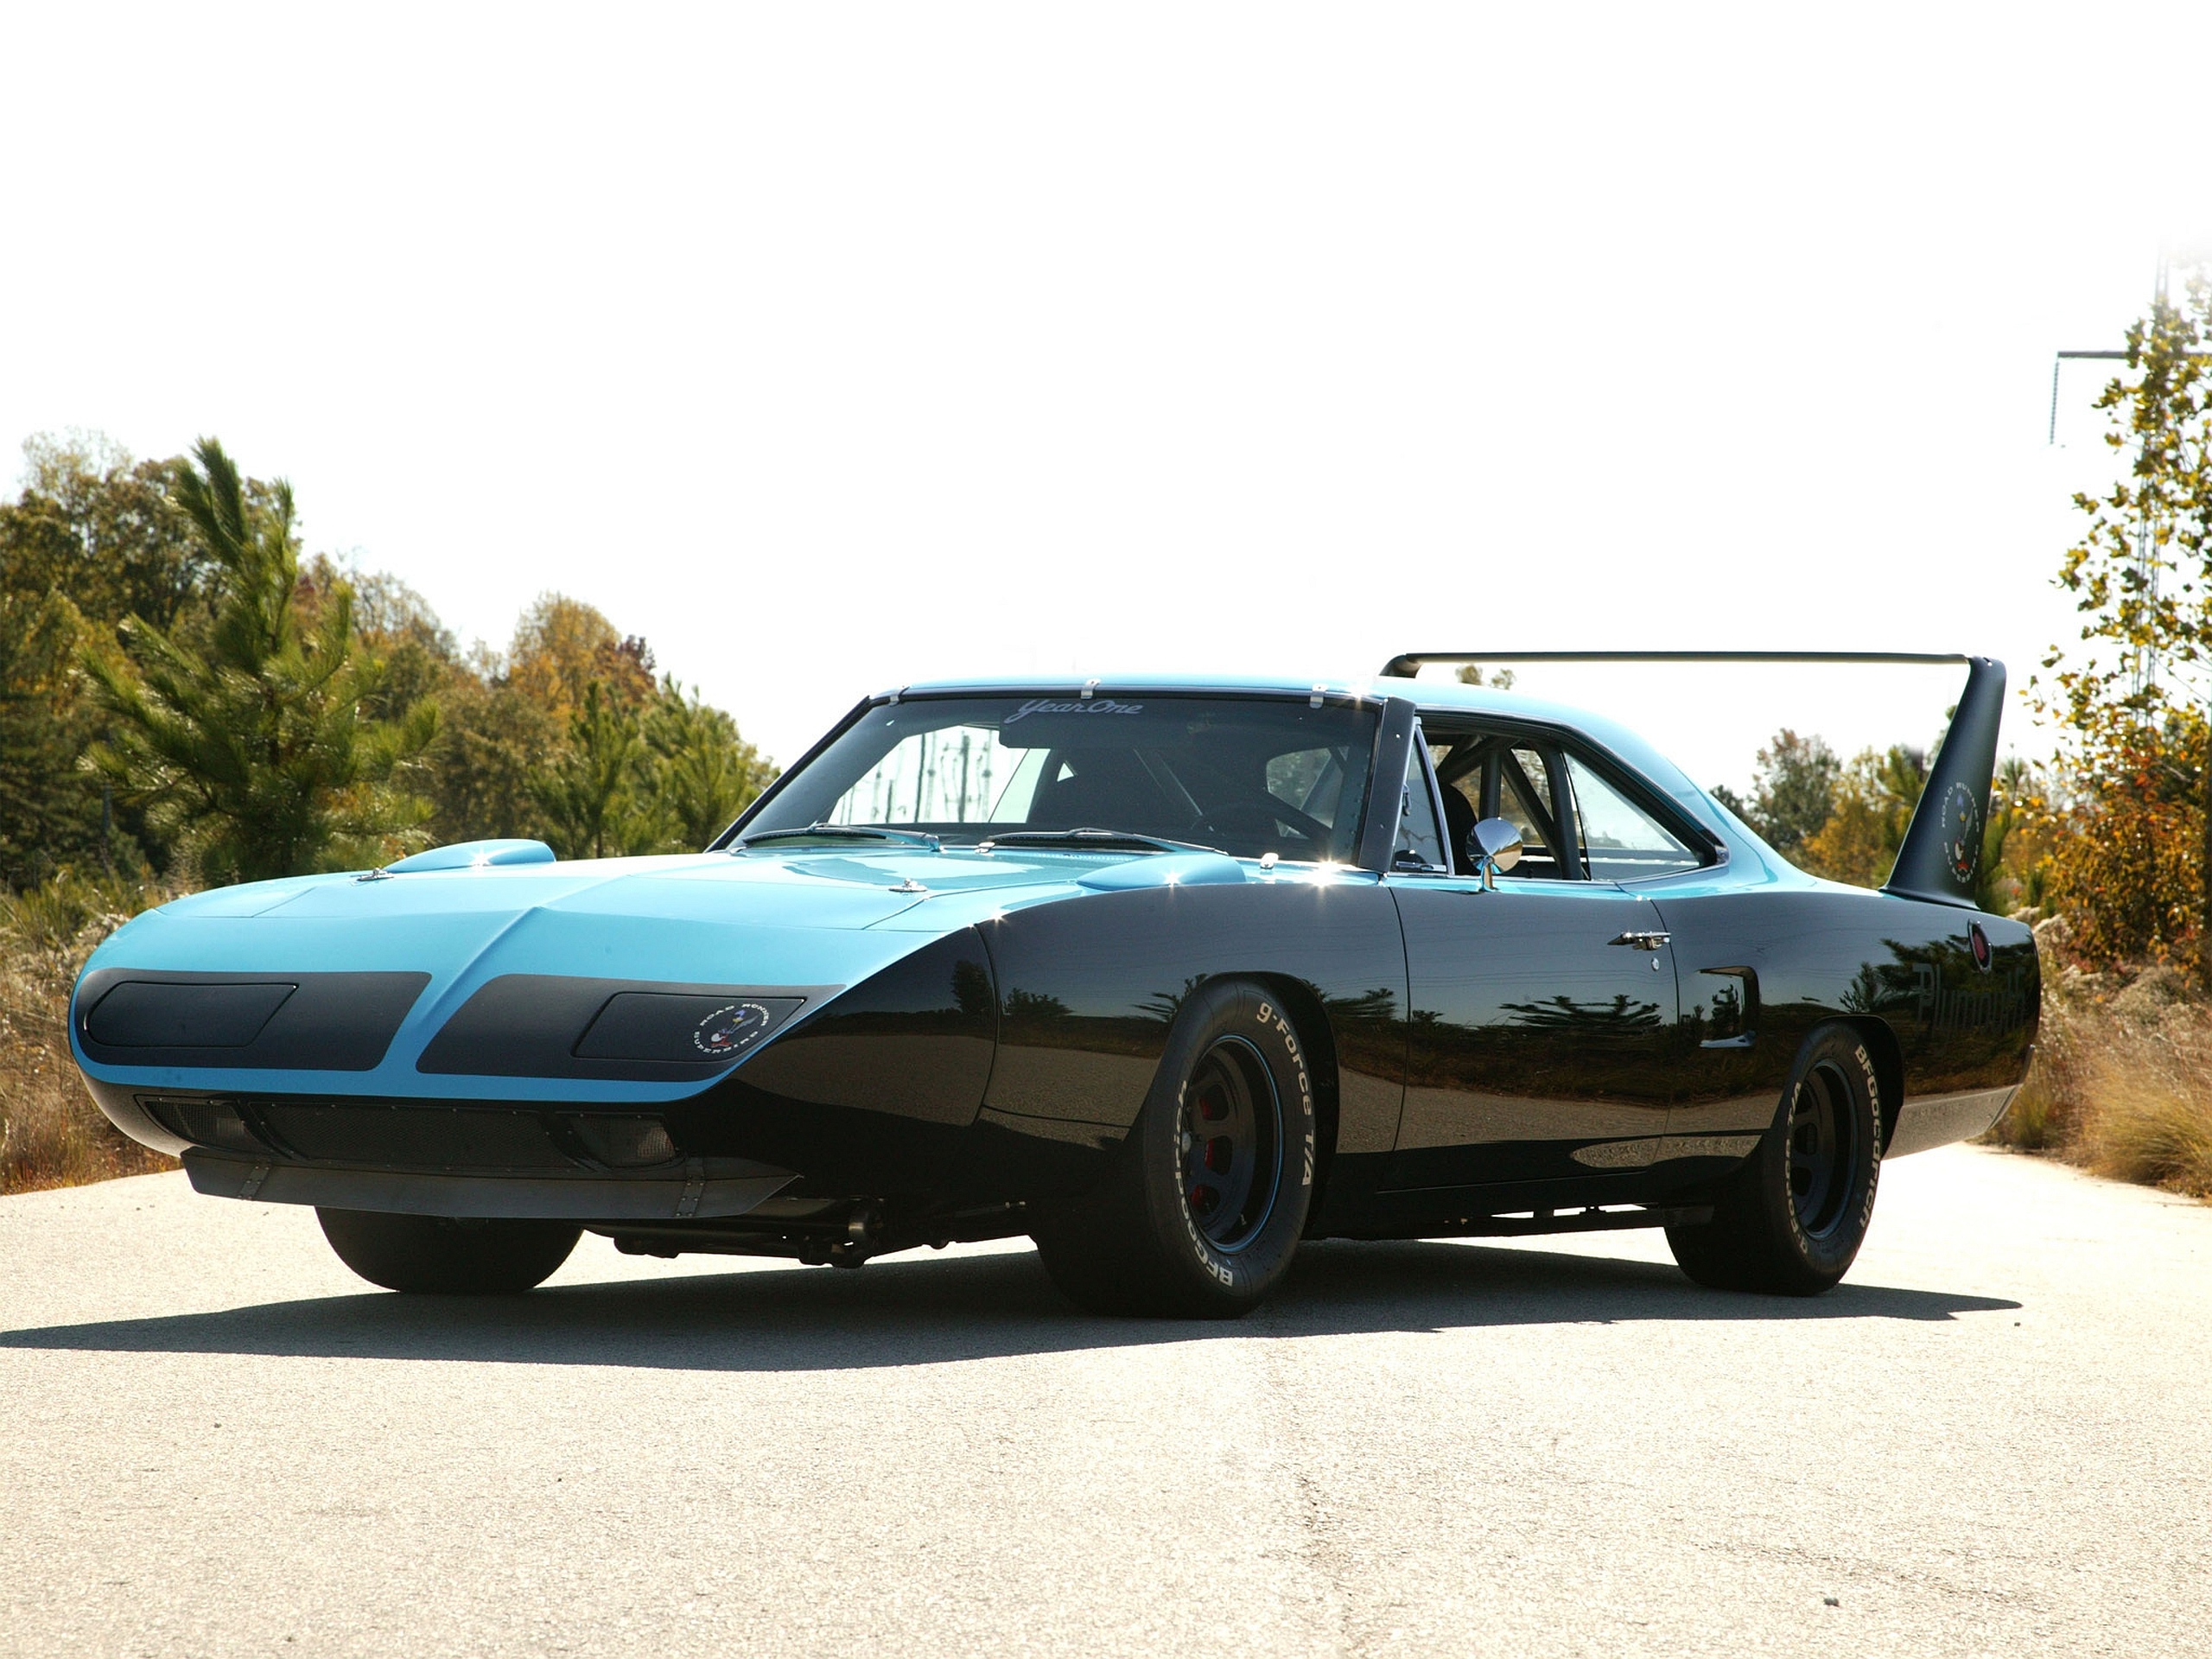 vehicles, 1970 plymouth superbird, plymouth 4K Ultra